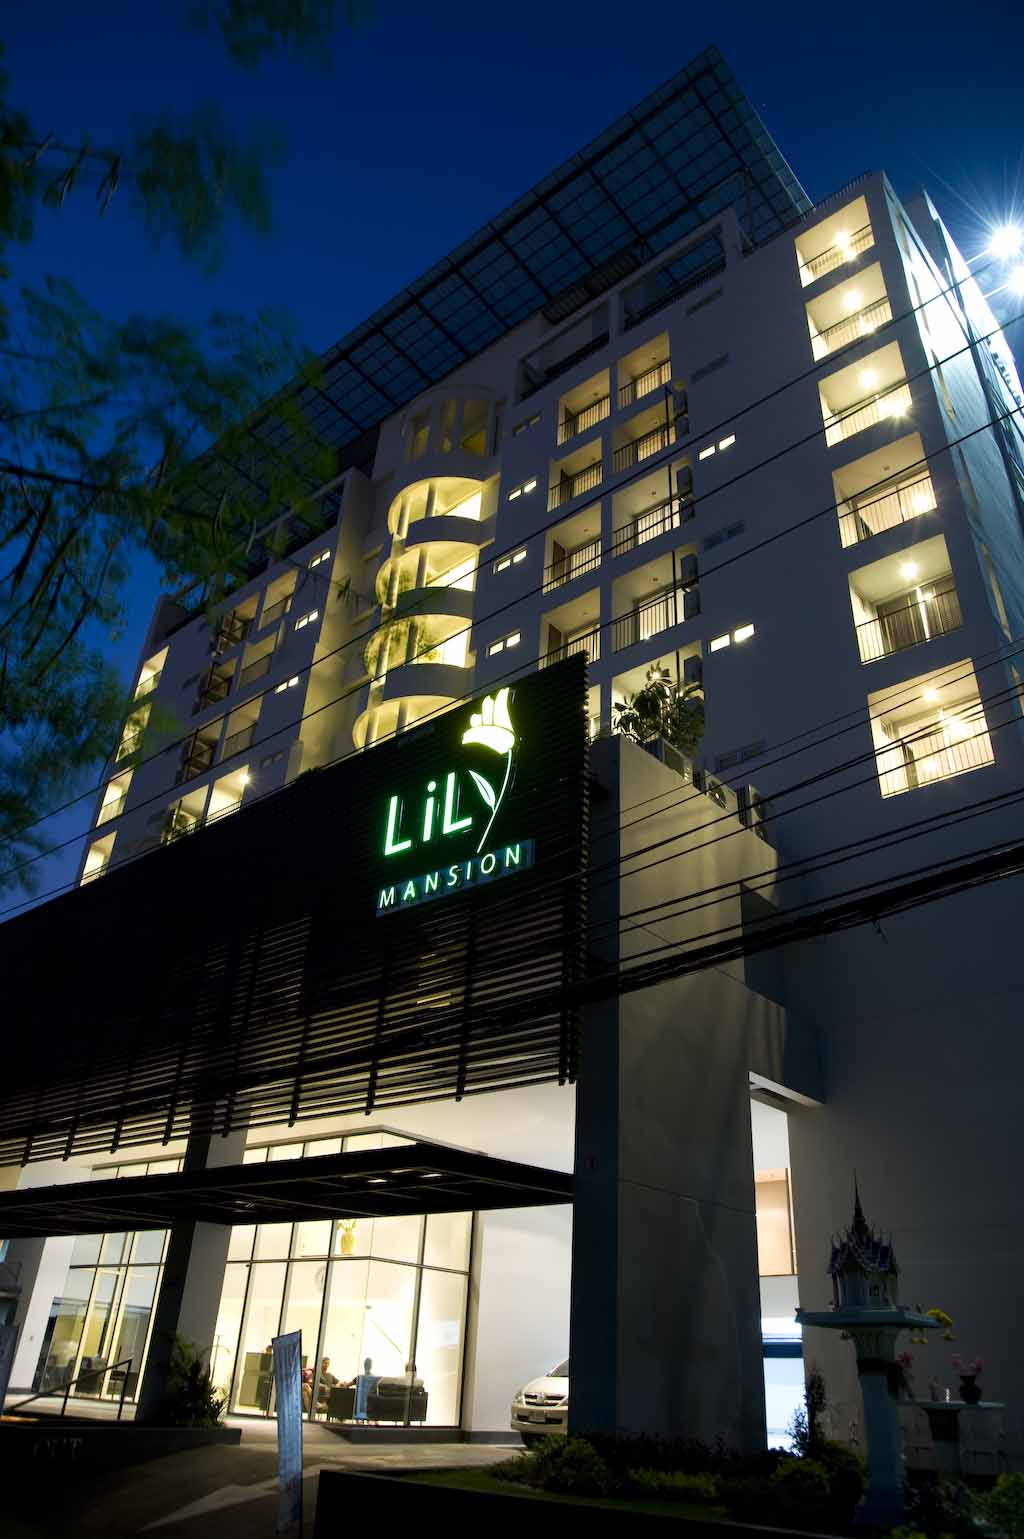 Find your hotel jobs in Bangkok at Lily Masnion